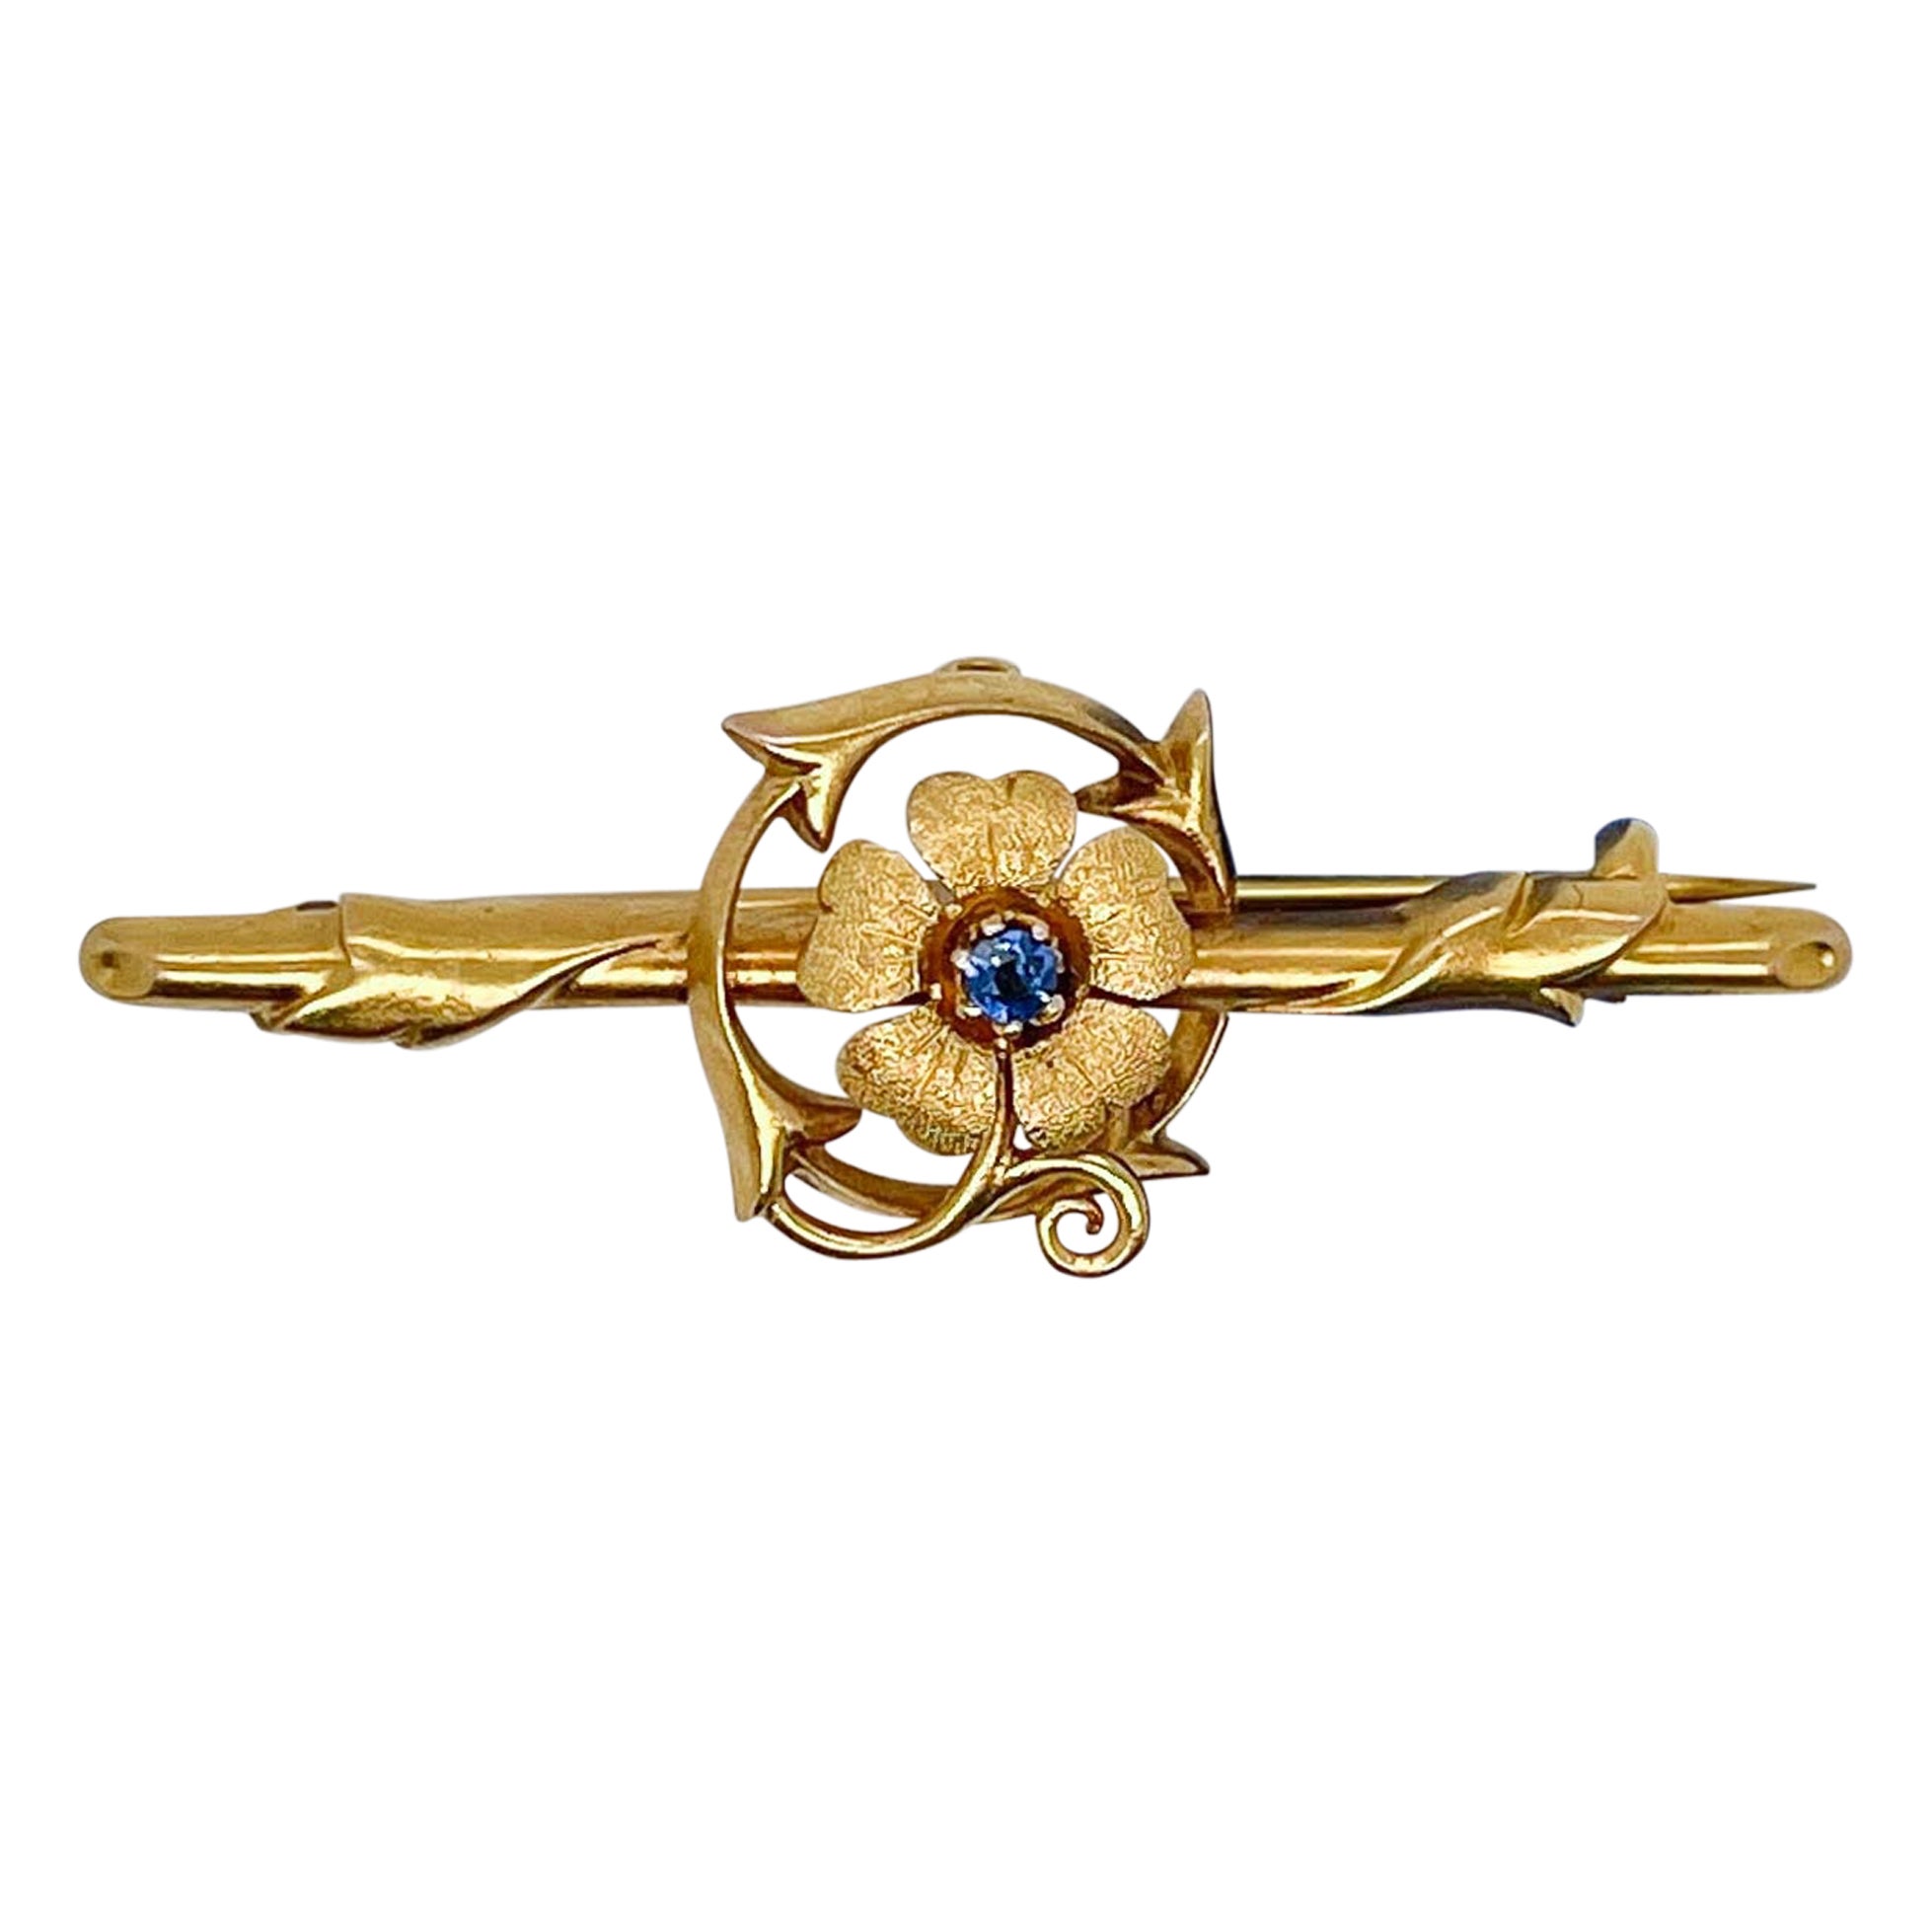 Signed Edwardian 15K Yellow Gold & Sapphire Flower Brooch or Bar Pin For Sale